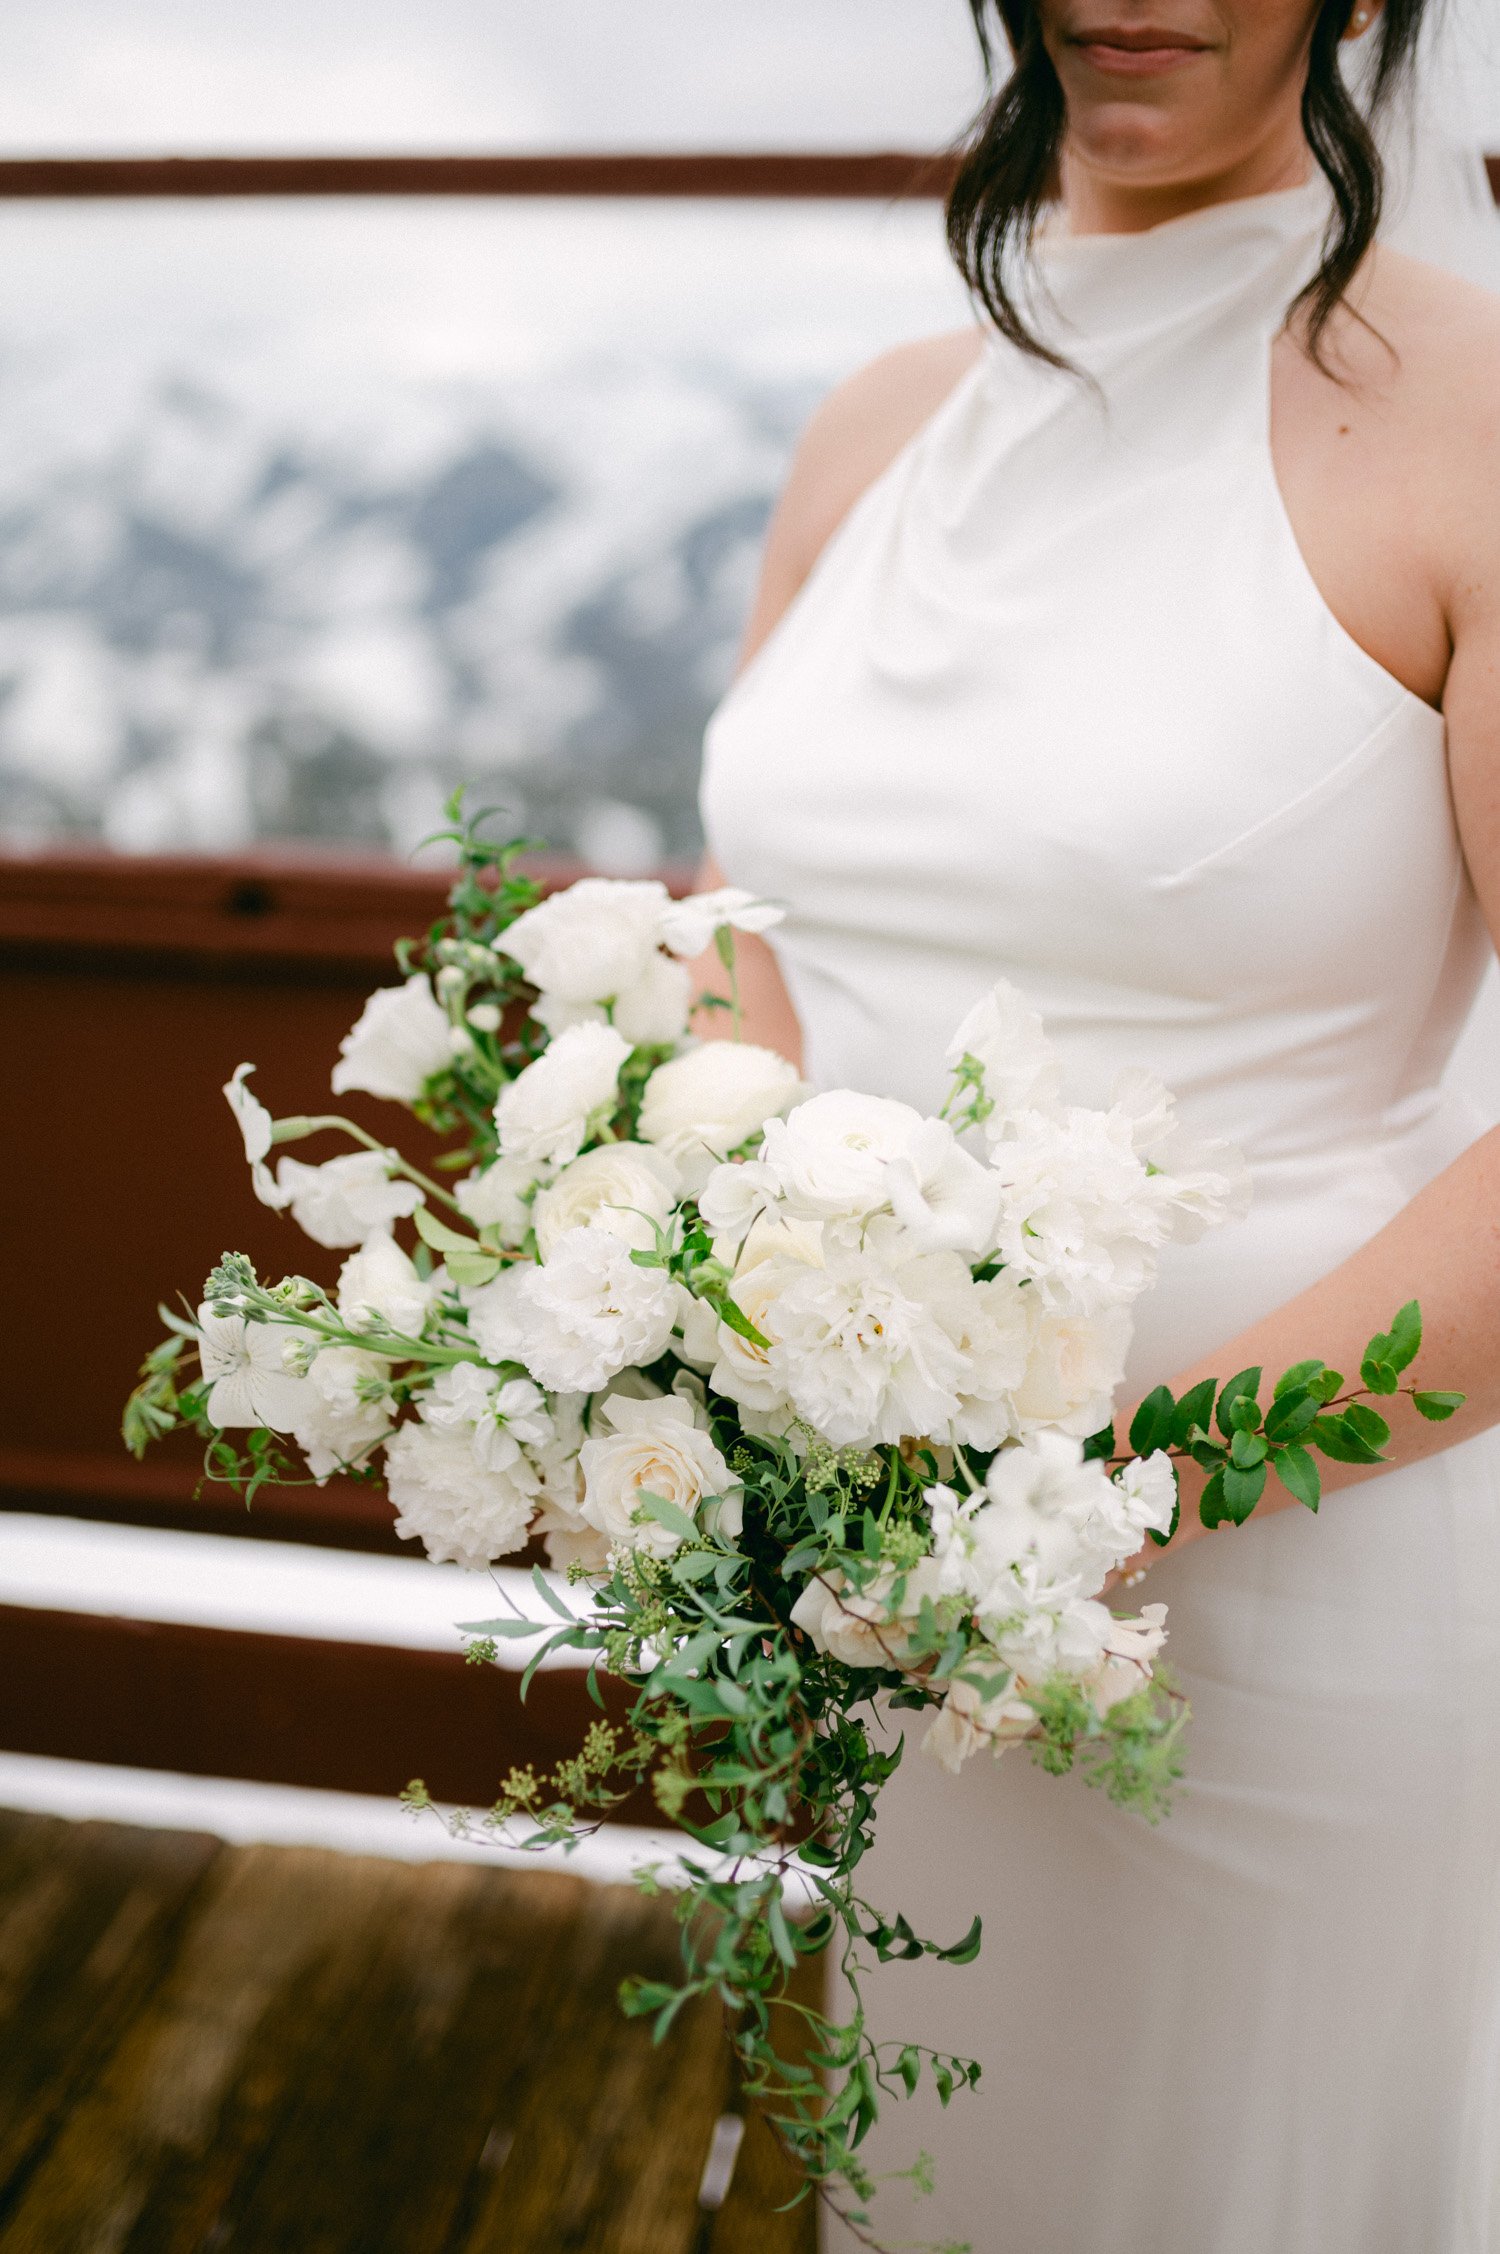 Sun Valley Roundhouse Wedding photos of the bride's wedding bouquet with white flowers and greenery accent